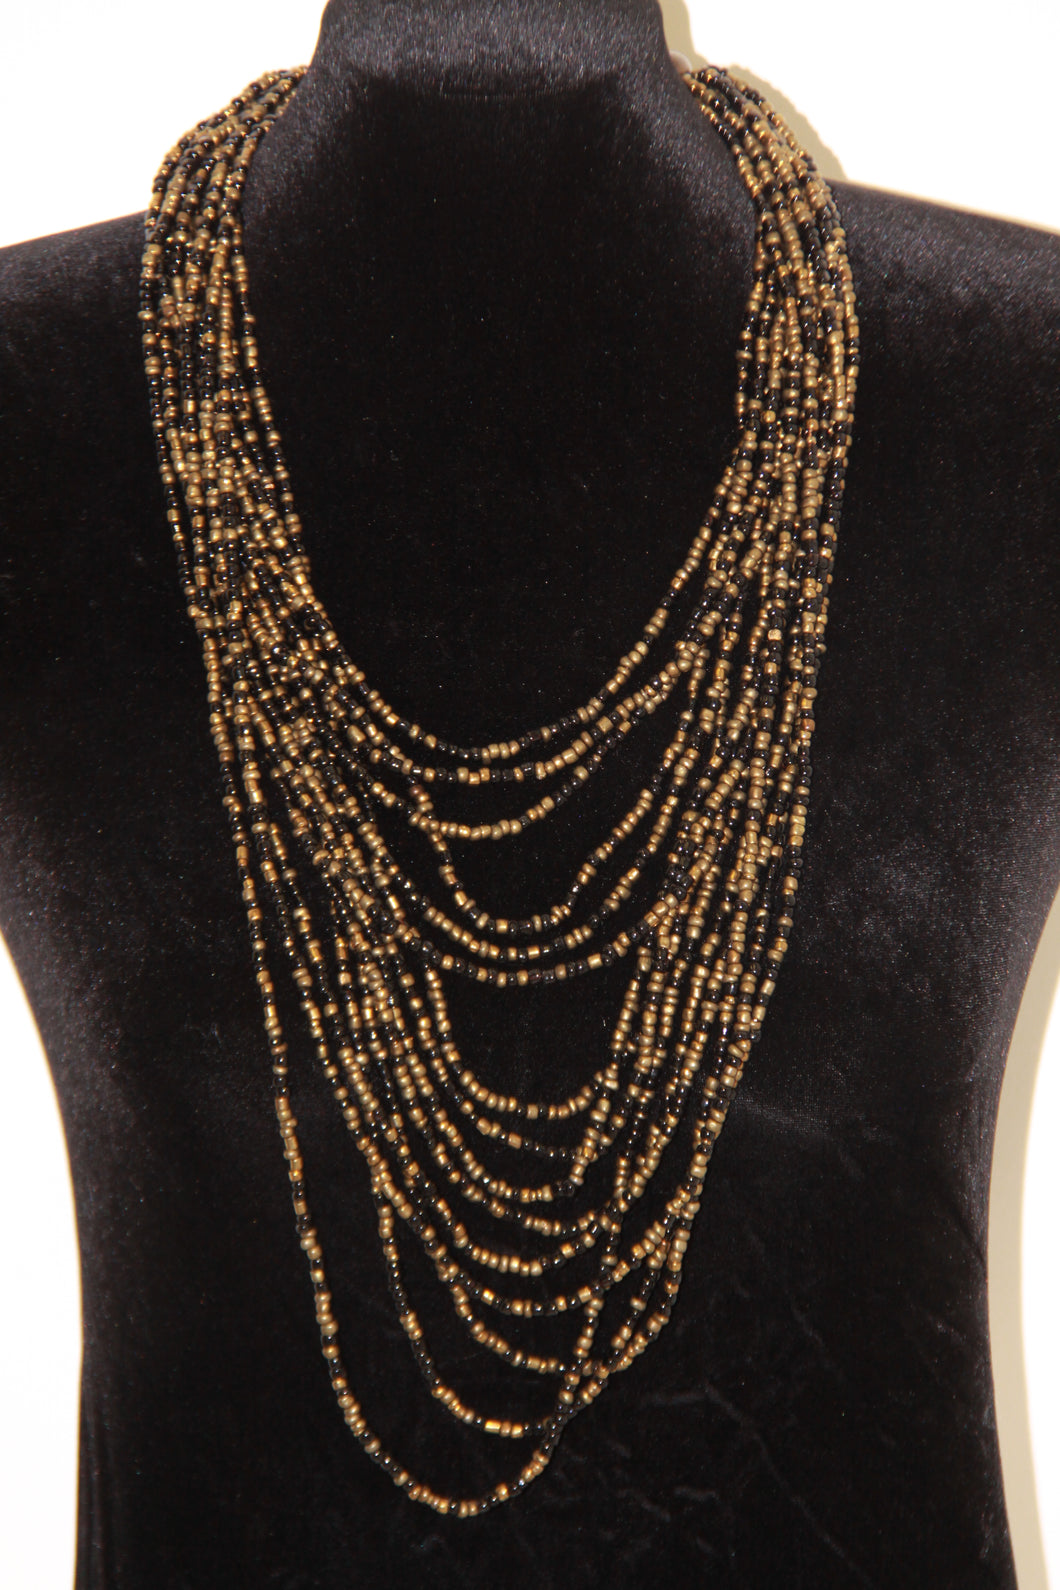 Long Black & Gold Beaded Necklace